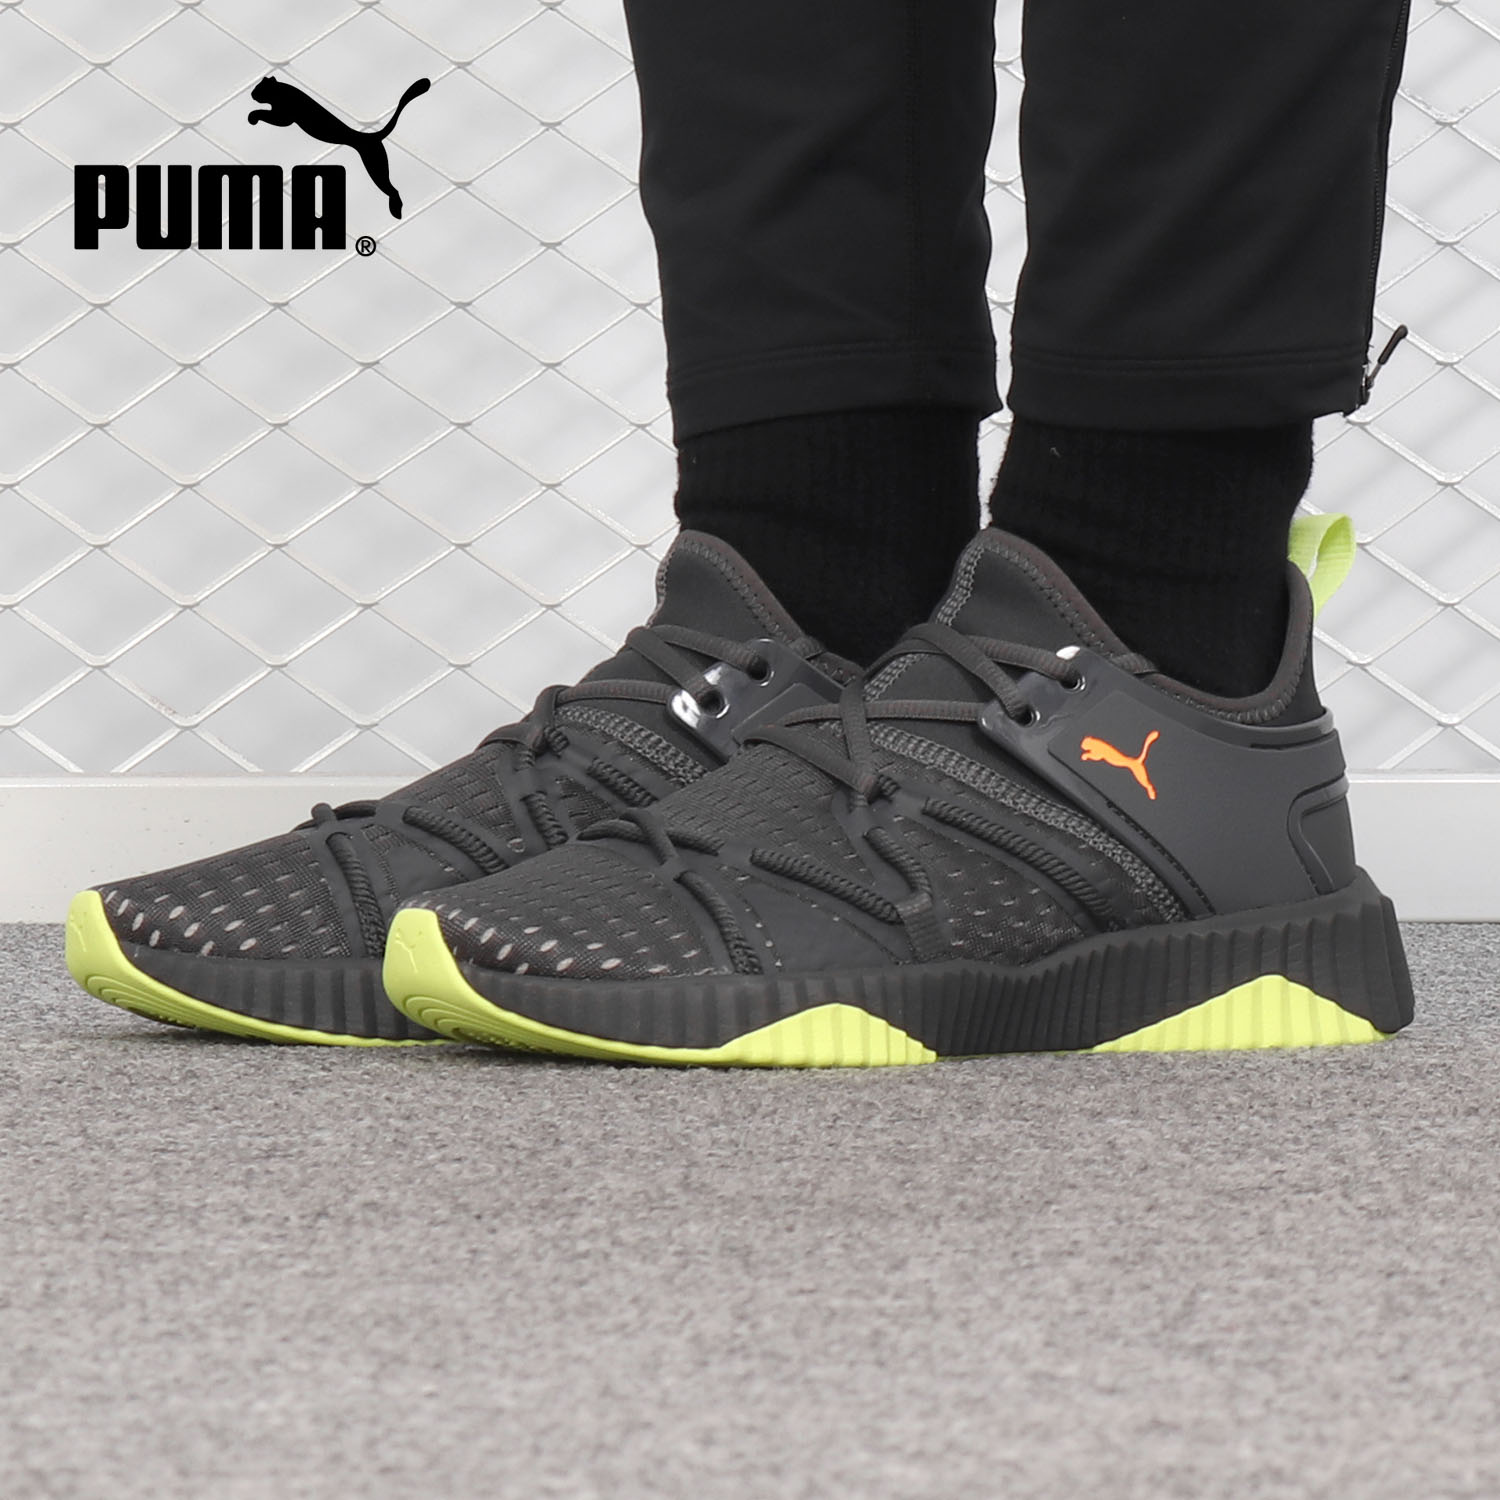 Puma/Puma Authentic 2019 Spring and Autumn New Men's Leisure Sports Breathable Durable Running Shoe 192455